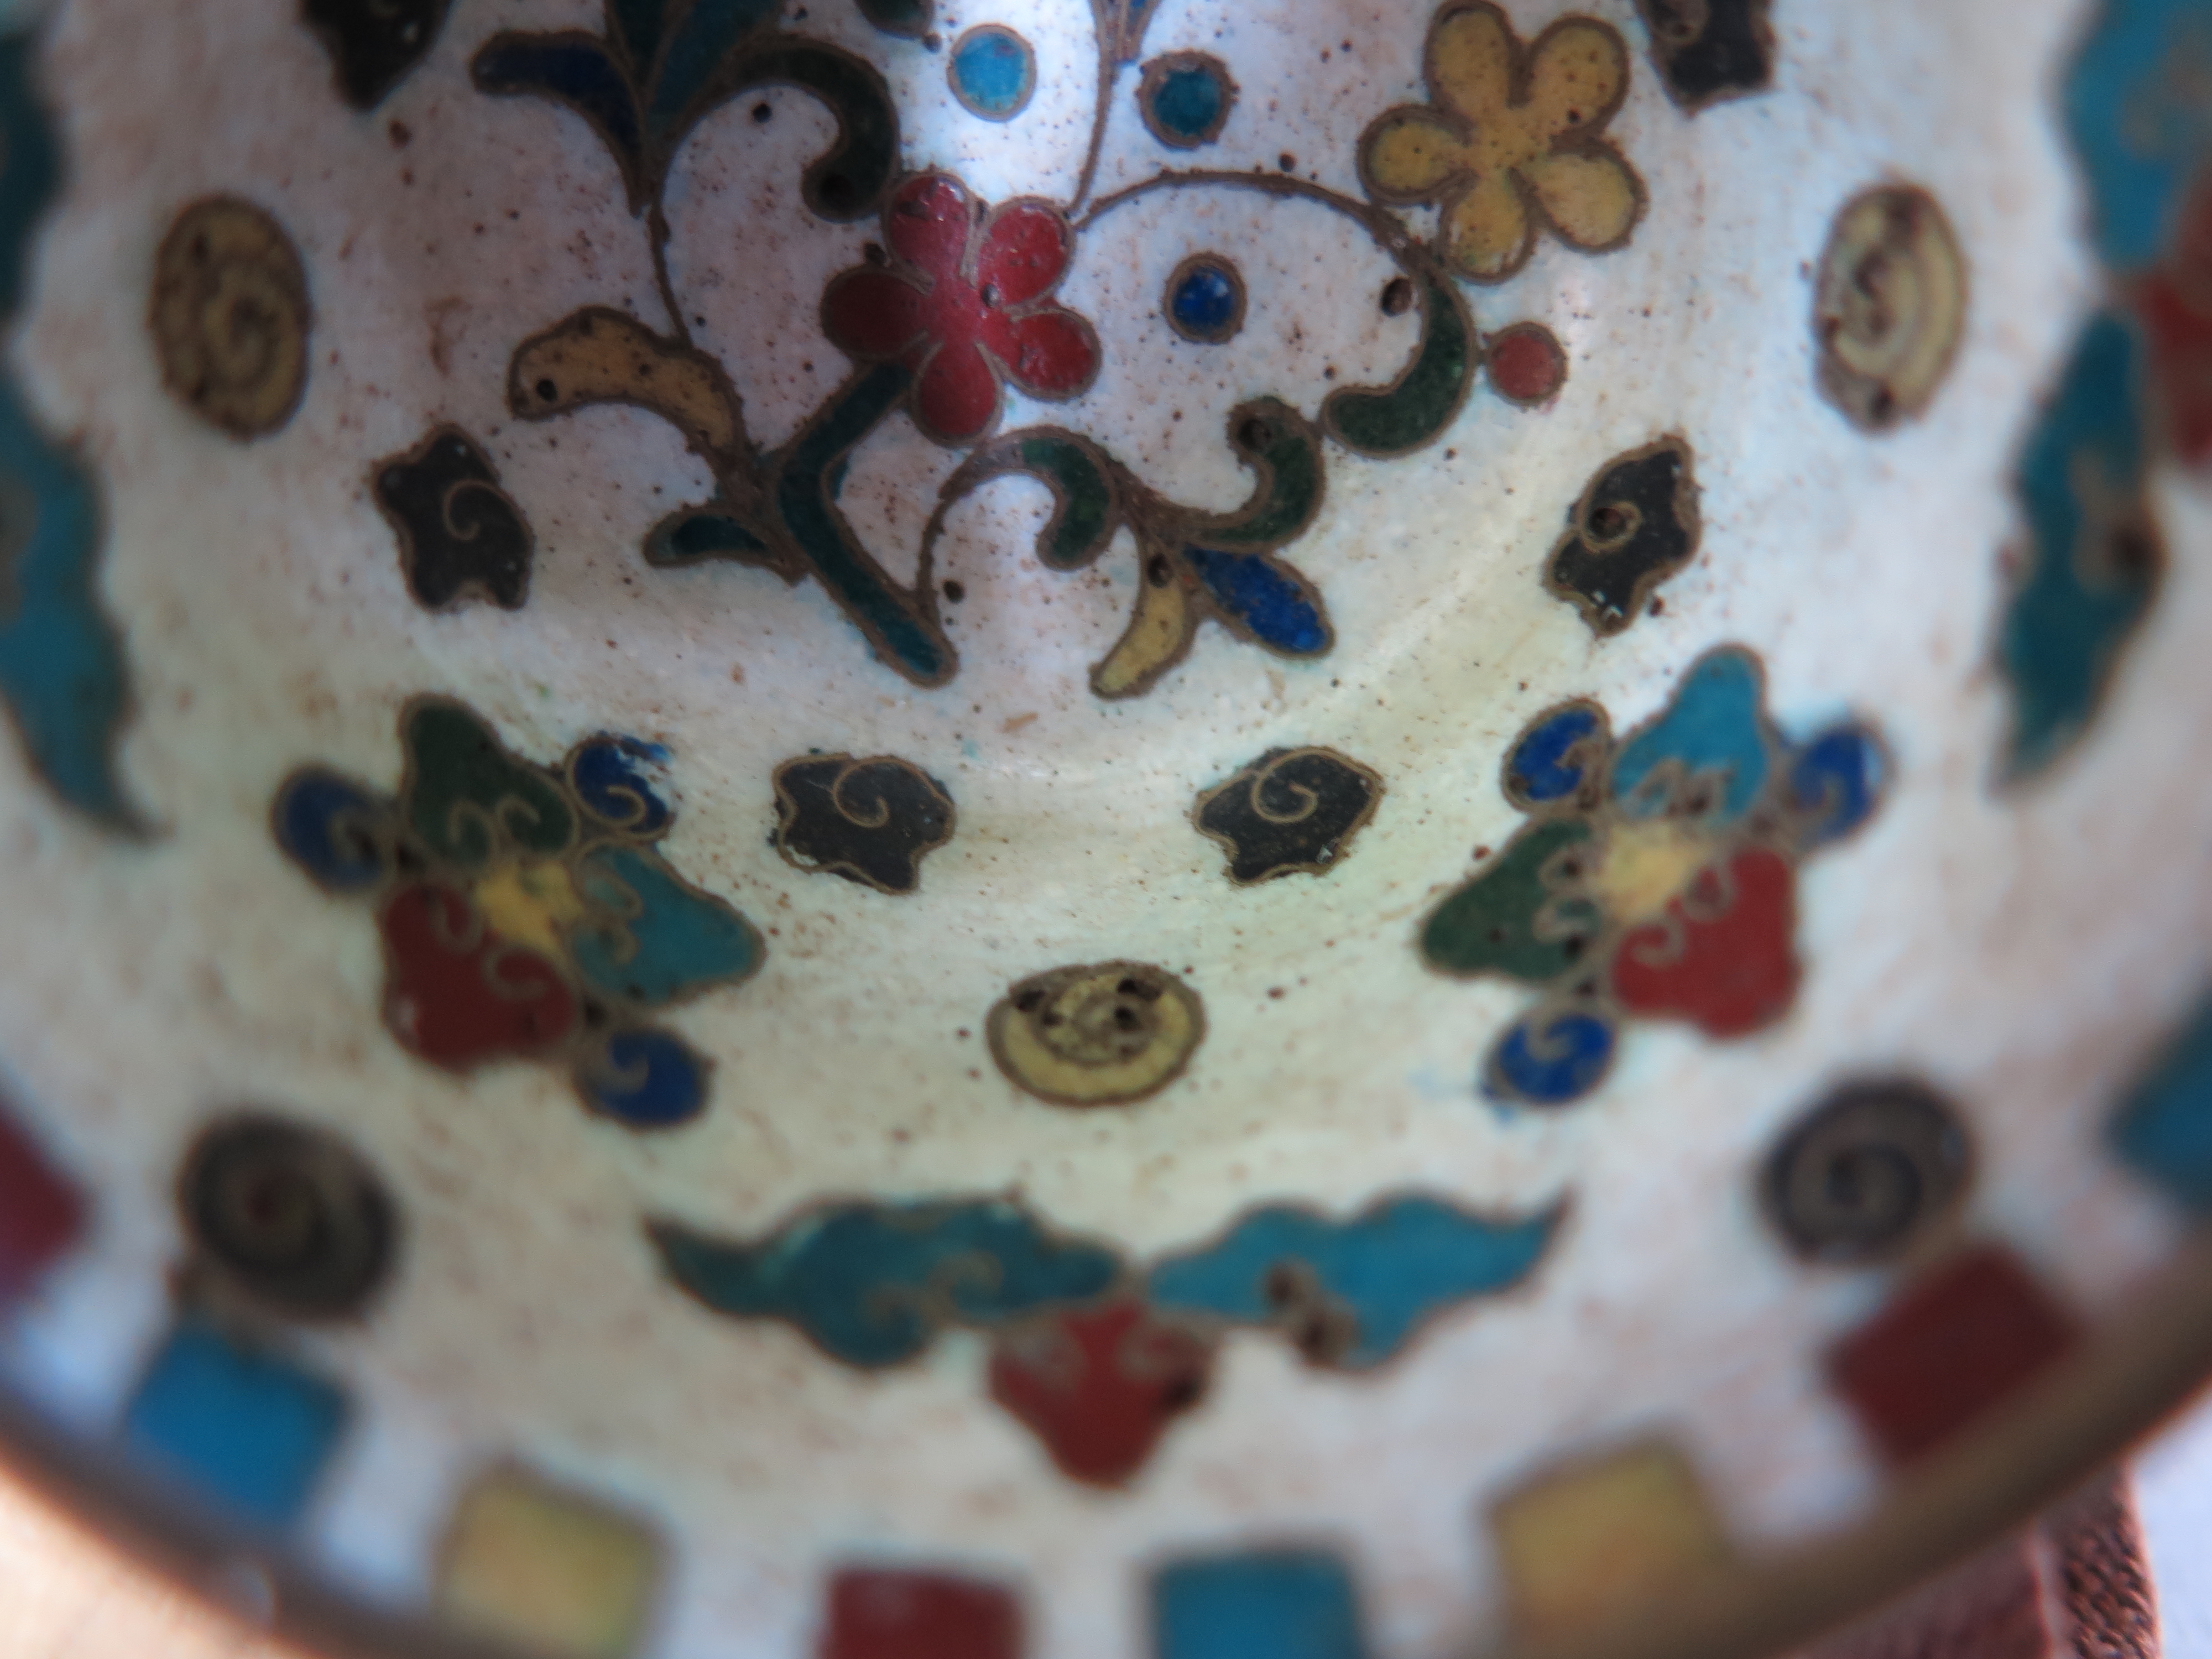 #1539  Rare Chinese Ming Dynasty Cloisonne Enamel Wine Cup, Wanli (1578-1619)   **Price on Request**